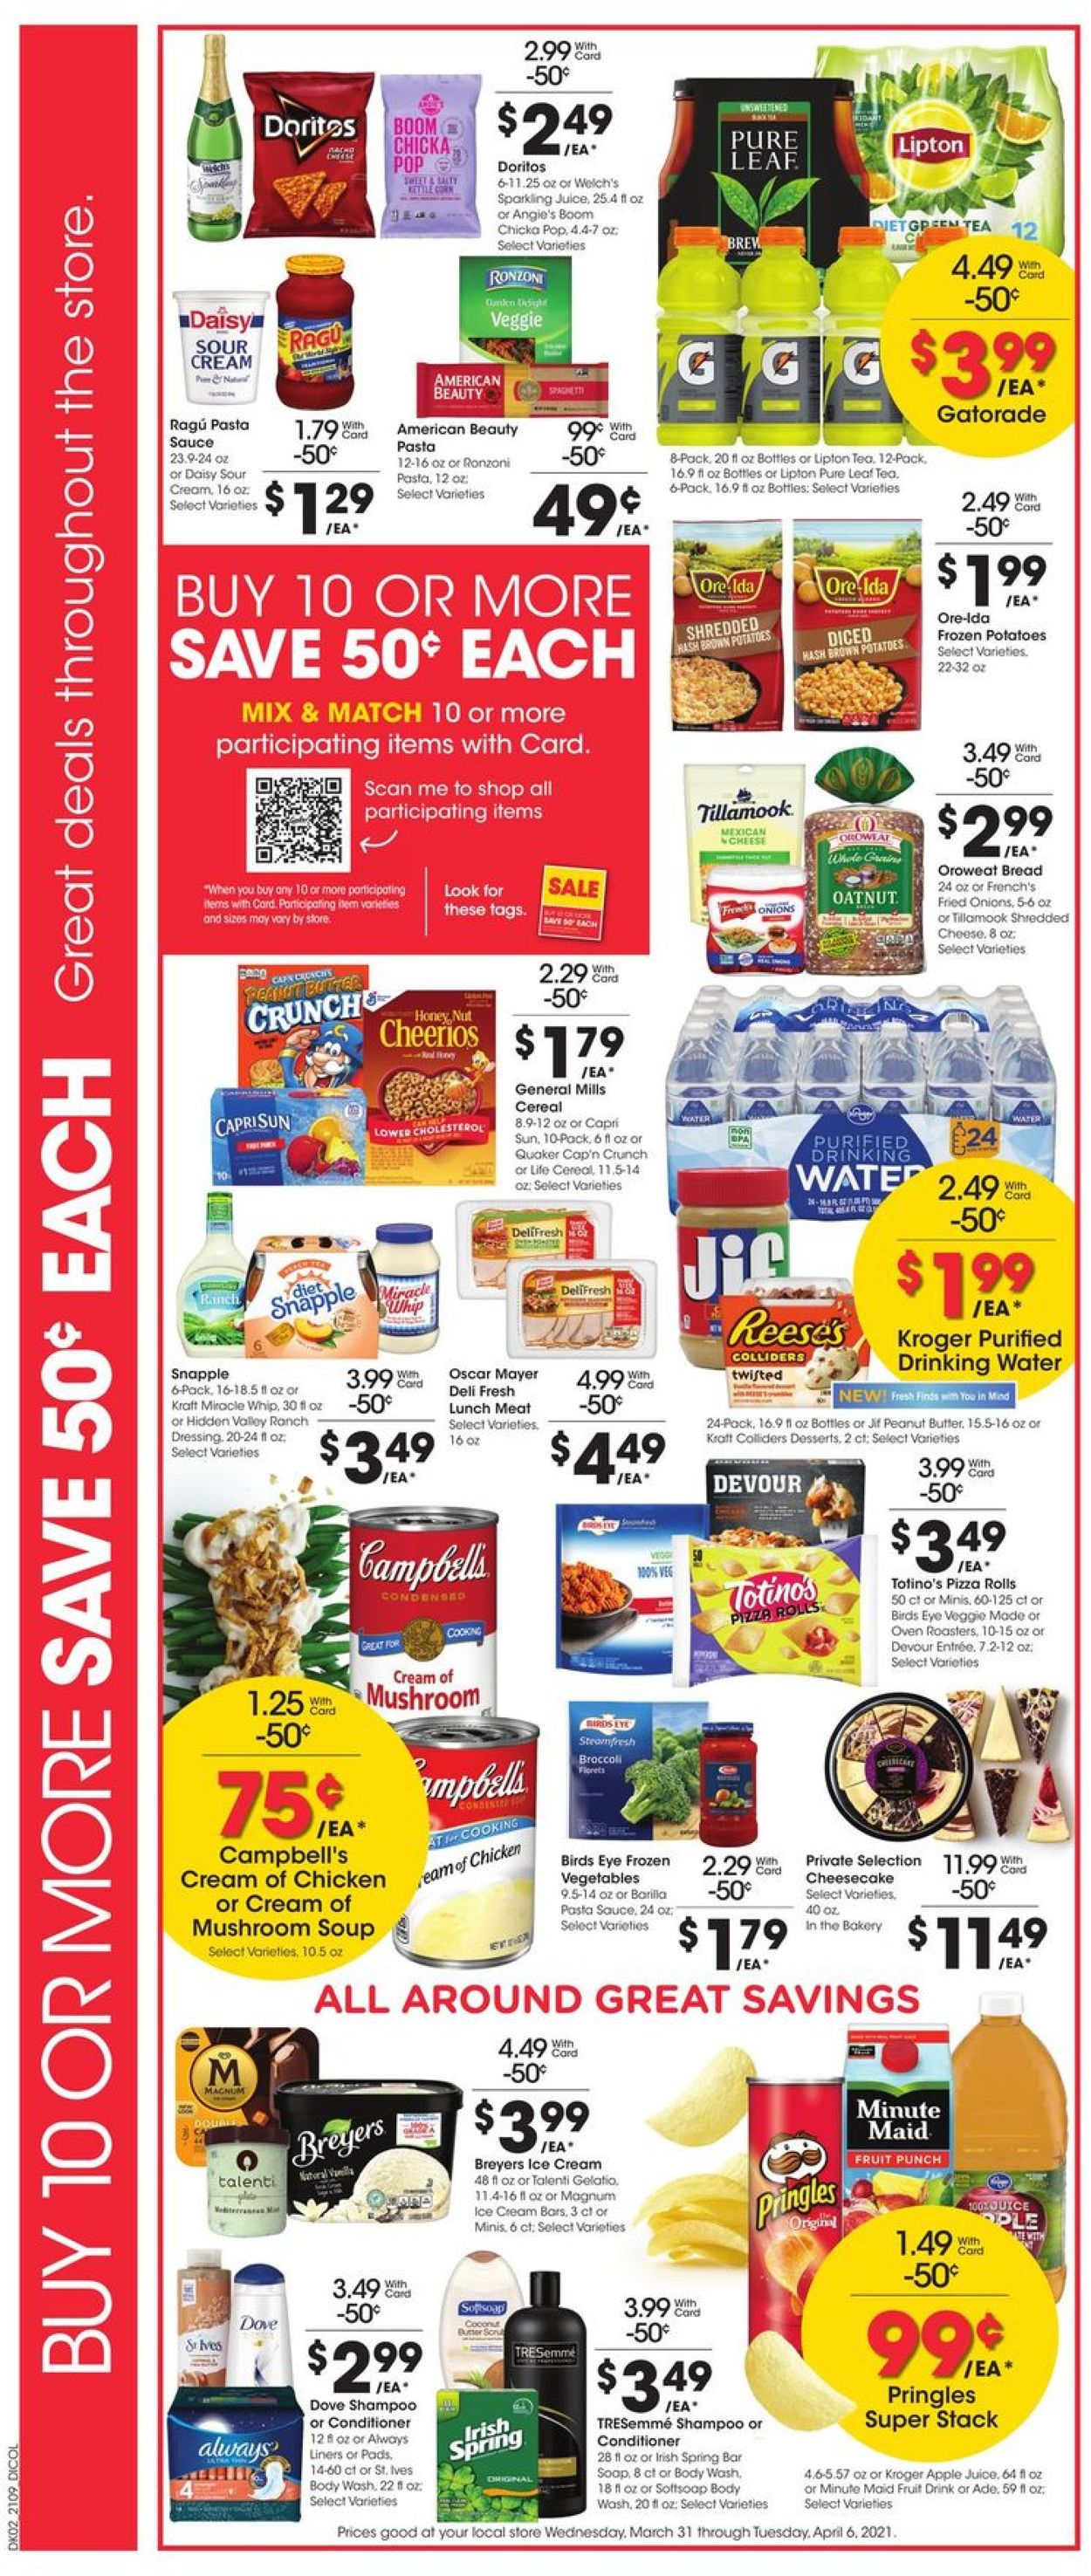 Gerbes Super Markets - Easter 2021 ad Weekly Ad Circular - valid 03/31-04/06/2021 (Page 3)